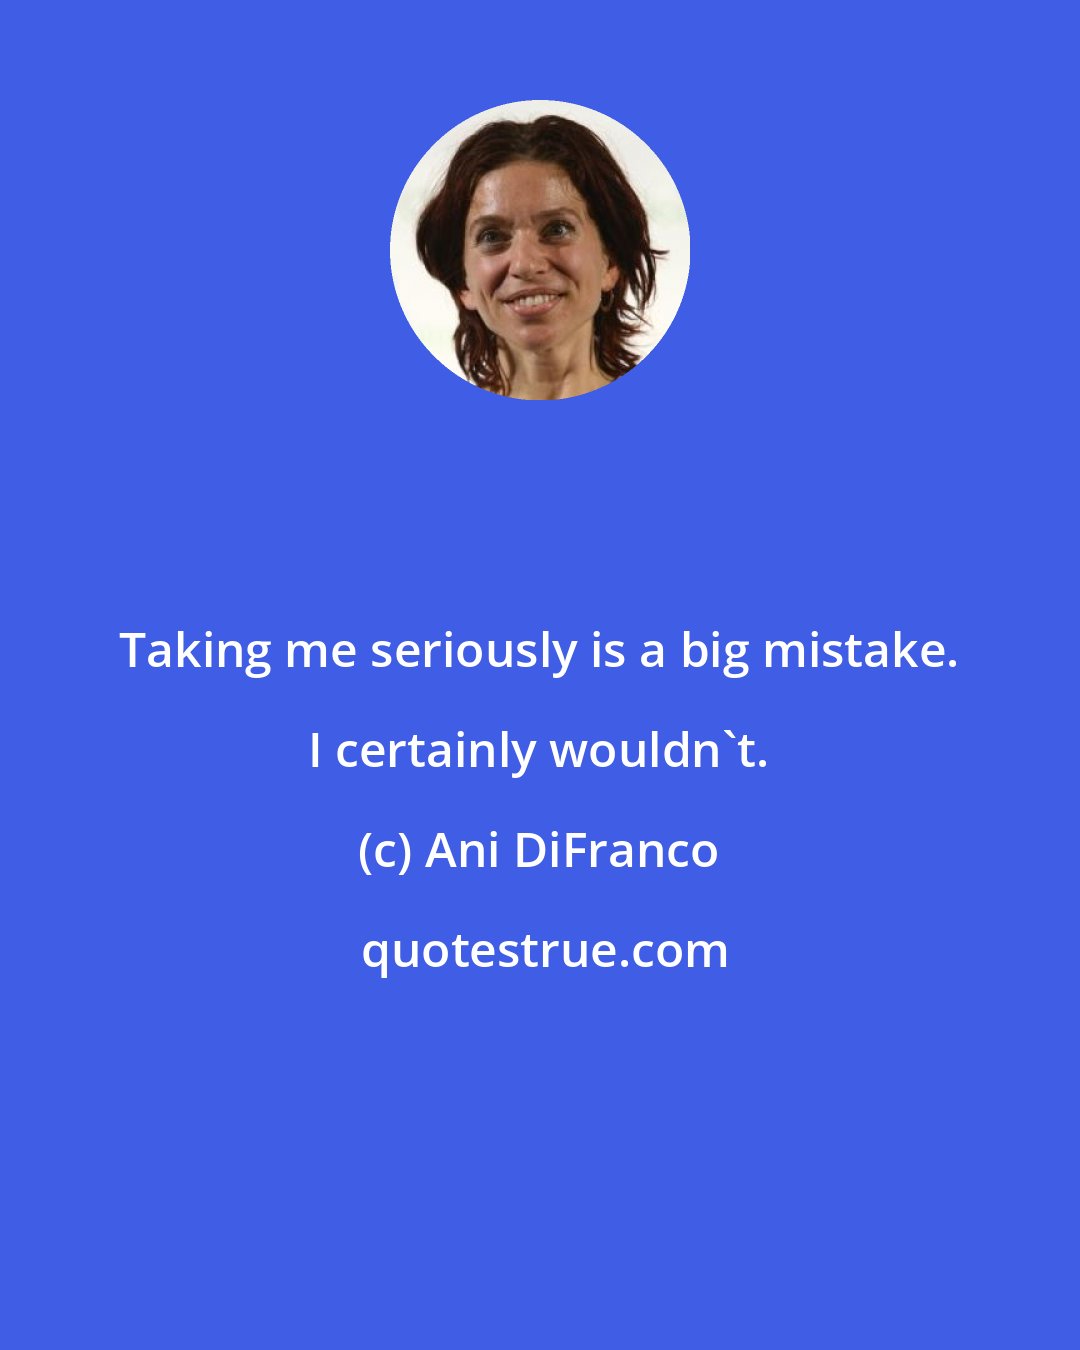 Ani DiFranco: Taking me seriously is a big mistake. I certainly wouldn't.